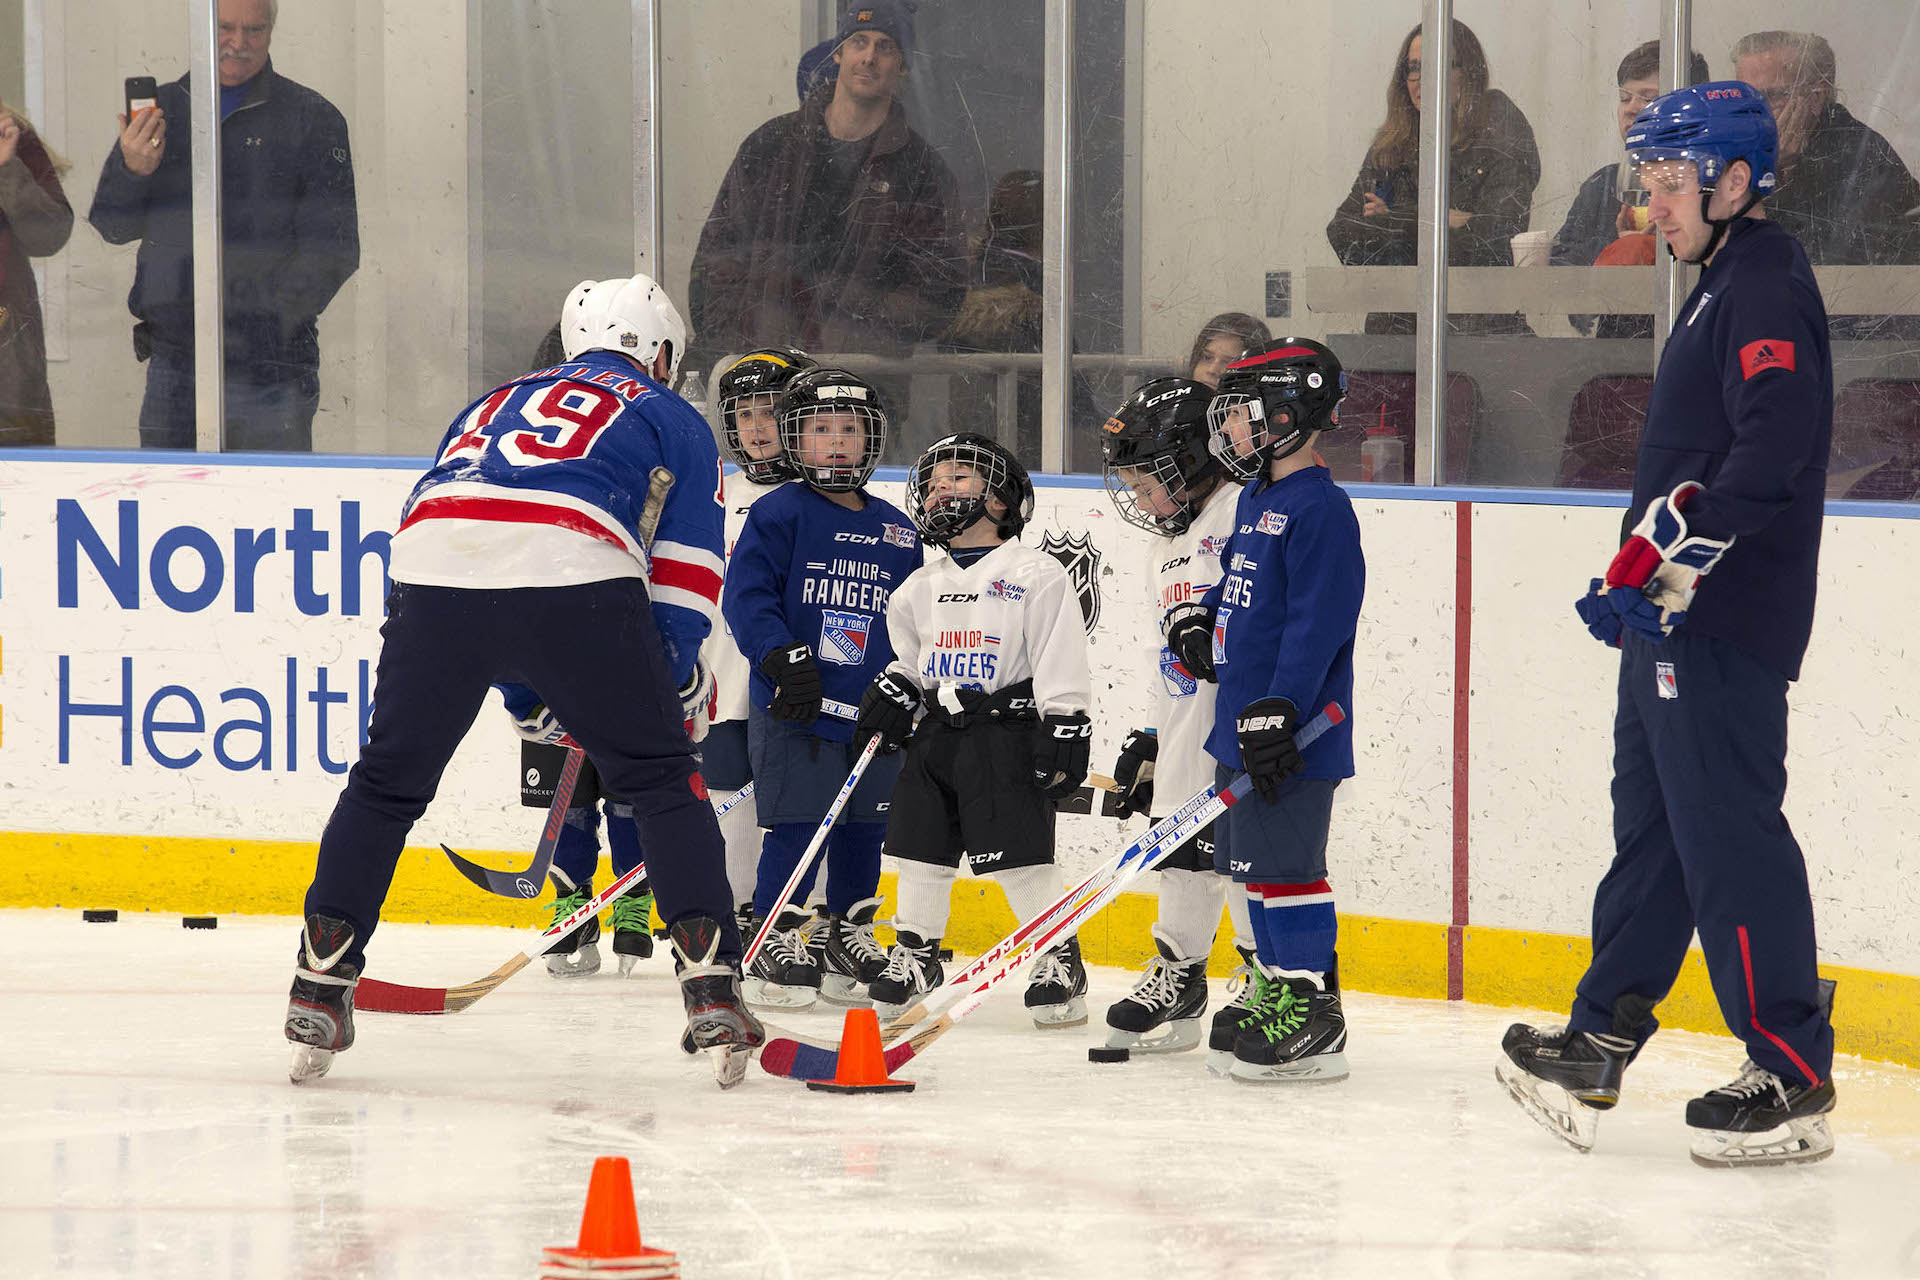 Watertown Youth Hockey Looking to Grow, Skating and Hockey Lessons